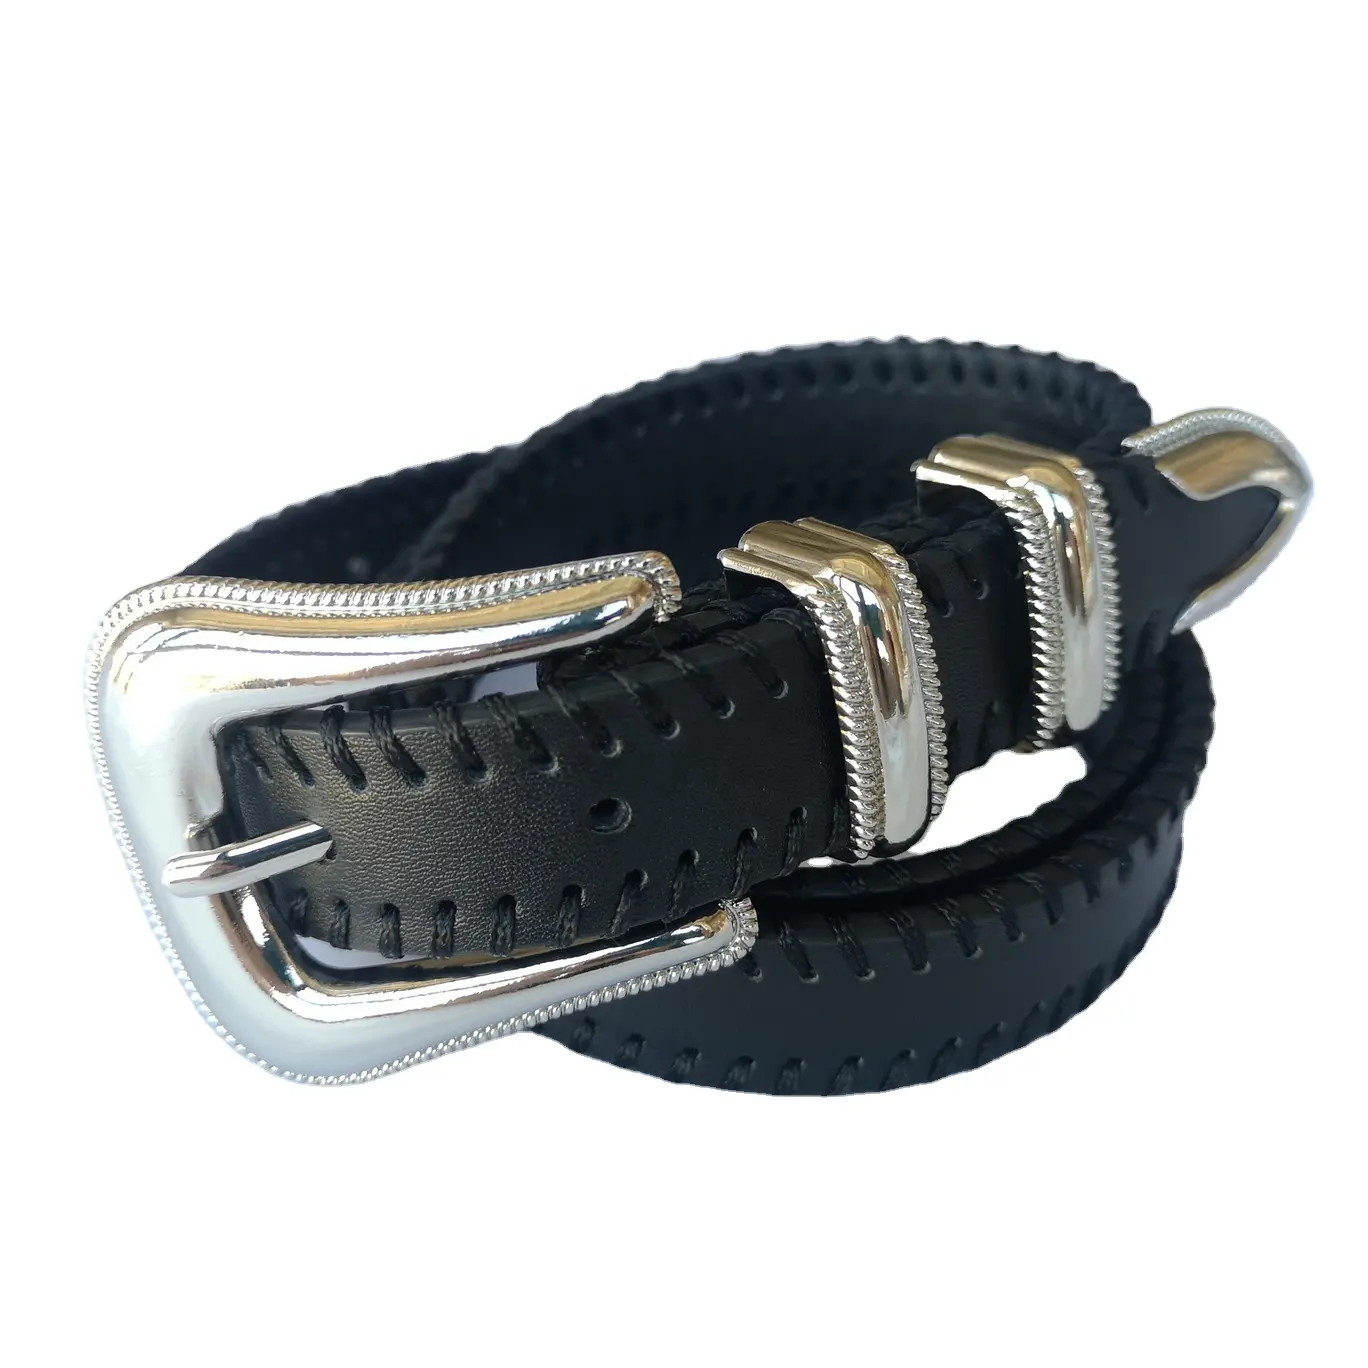 New Ladies Fashion Casual PU Belts in Four Metal Buckle Sets and Pure Handmade Plaited Finish Around Strap Edge